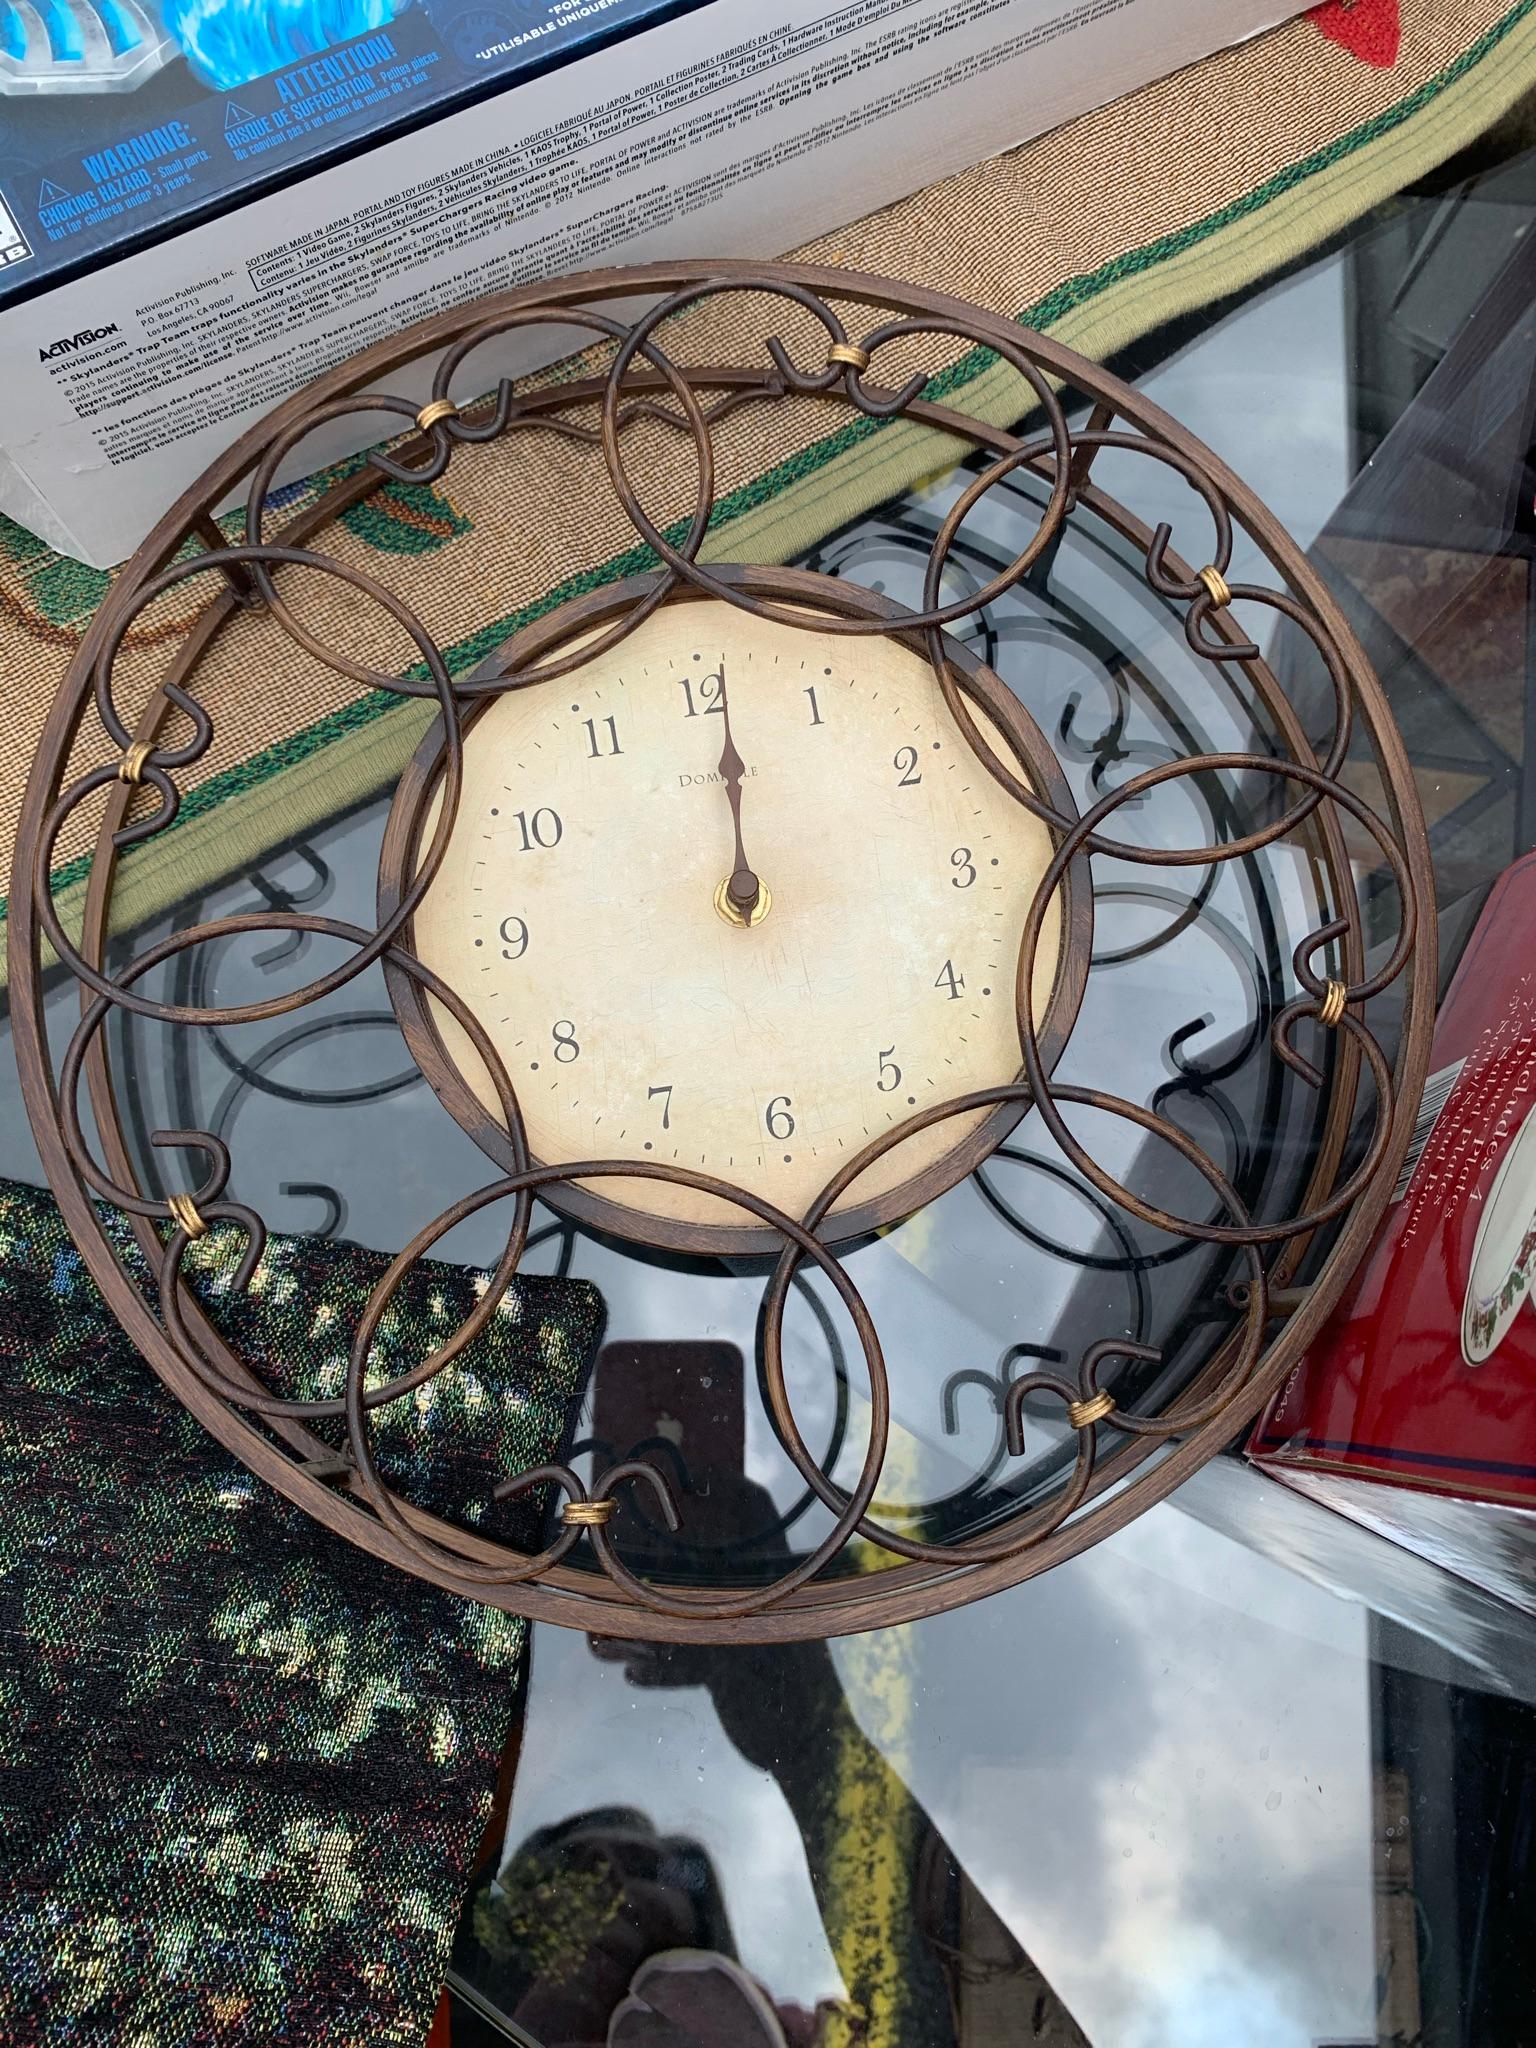 Decorative Items, Coleman Lanterns, Clock, Wii Accessories, Holiday Plates & More